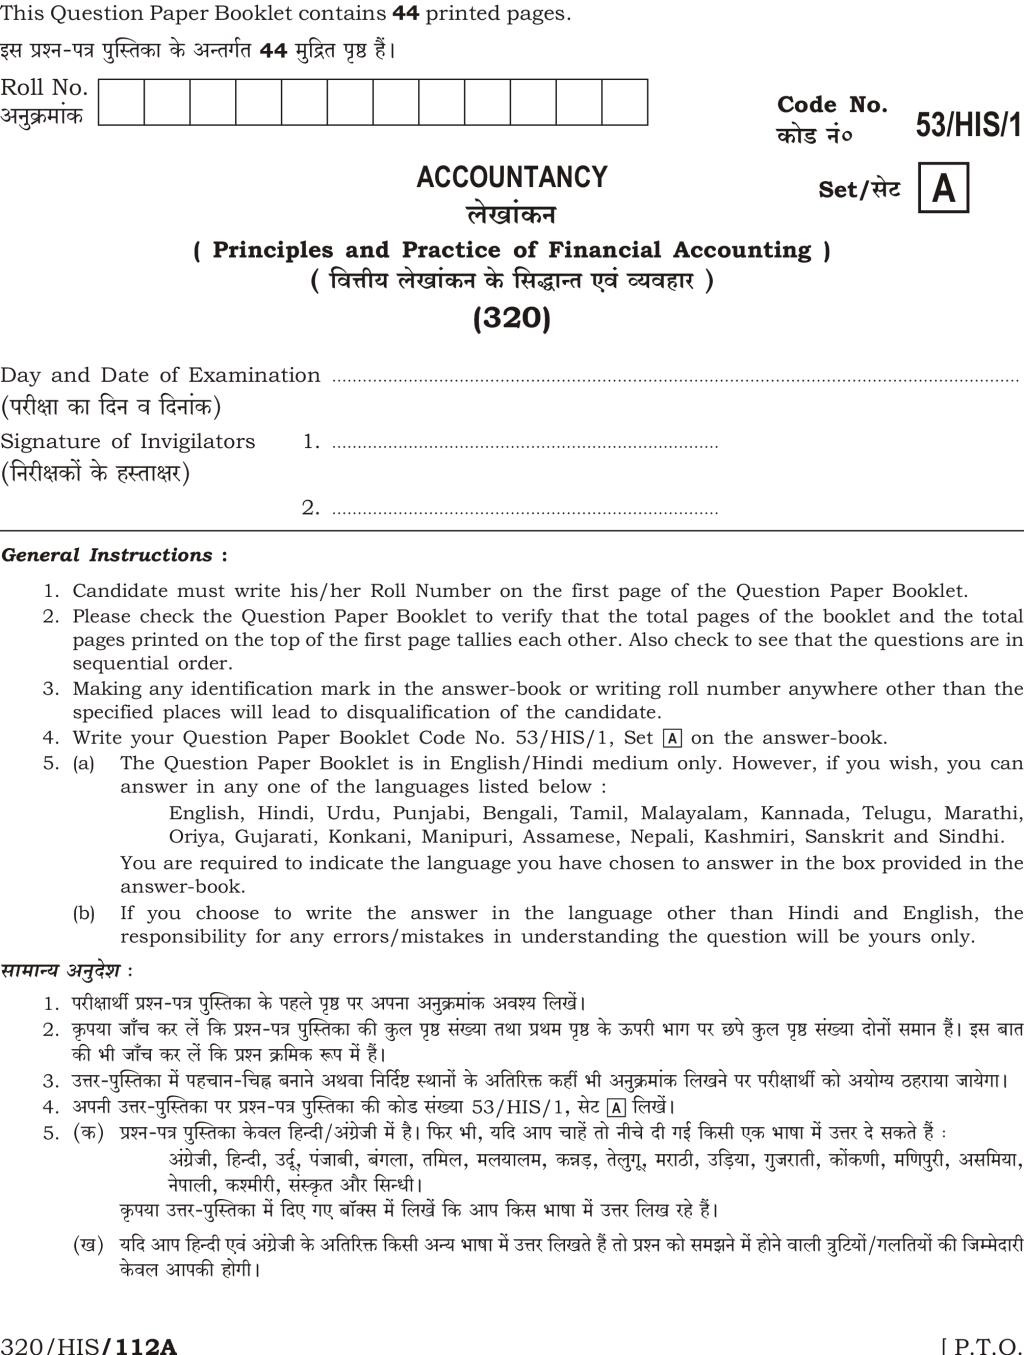 NIOS Class 12 Question Paper Oct 2016 - Accountancy - Page 1